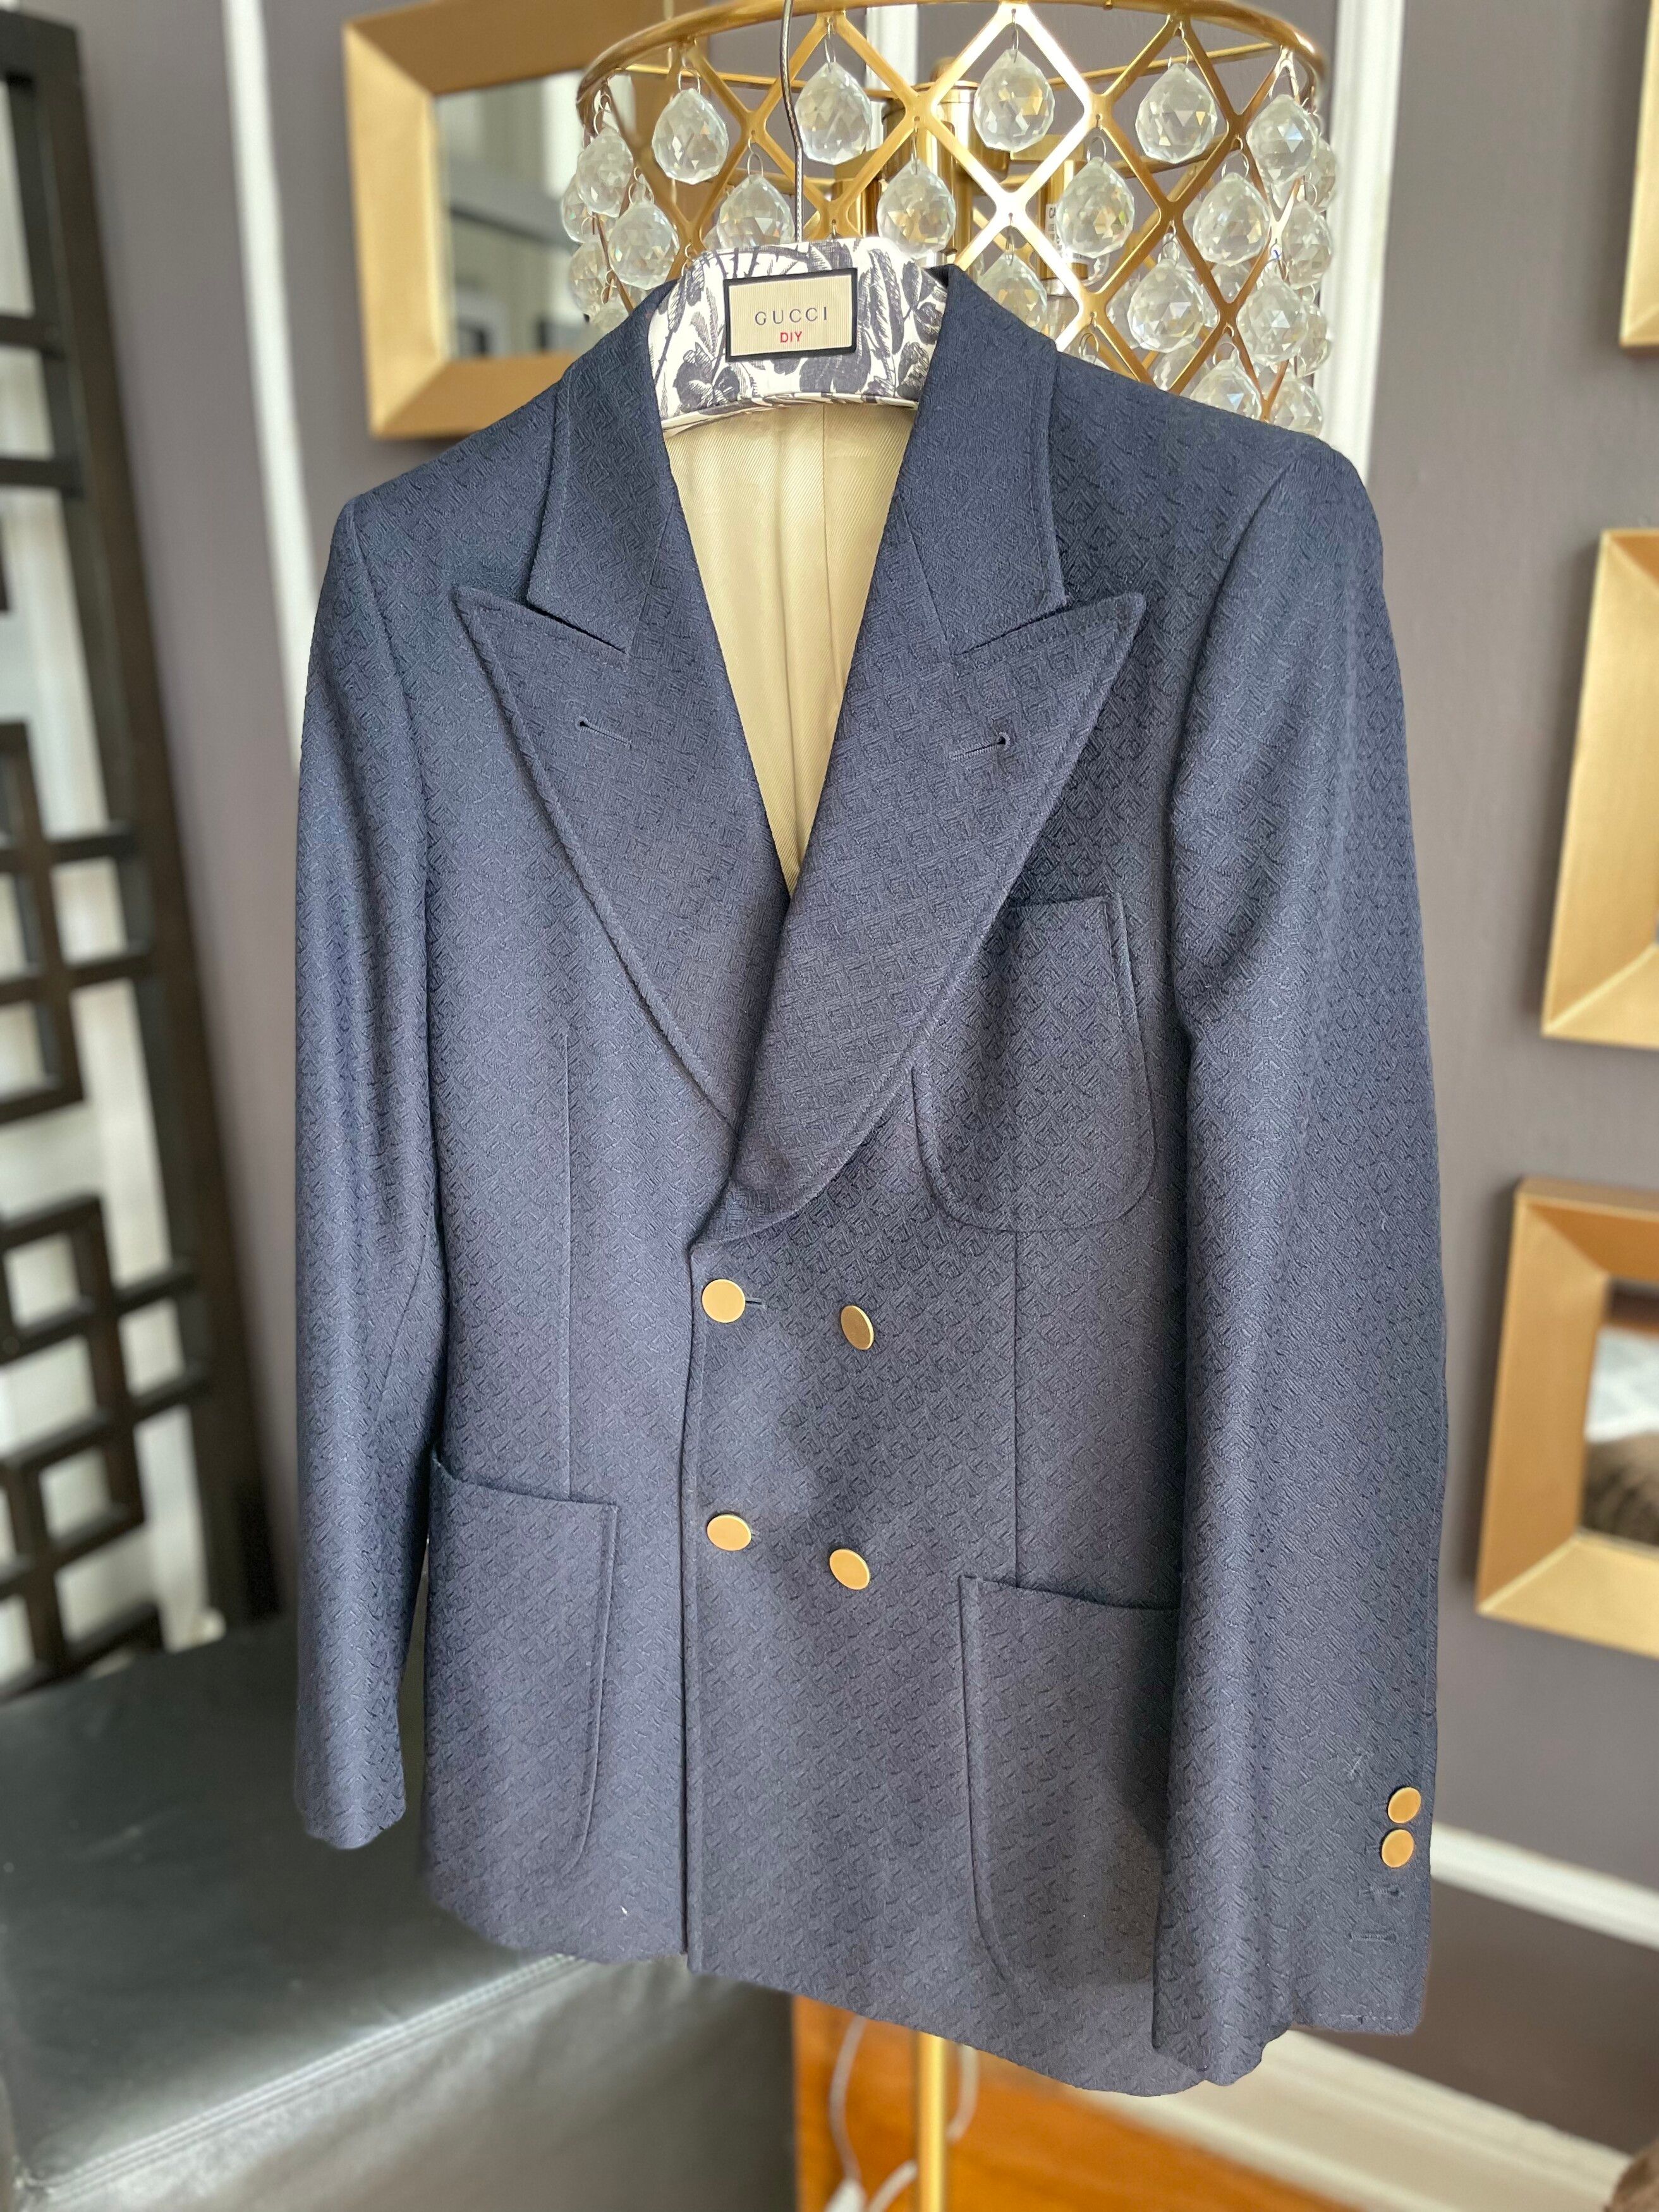 Gucci Gucci Navy Blue Texturized Double Breasted Blazer SS2020 Size 44R - 2 Preview